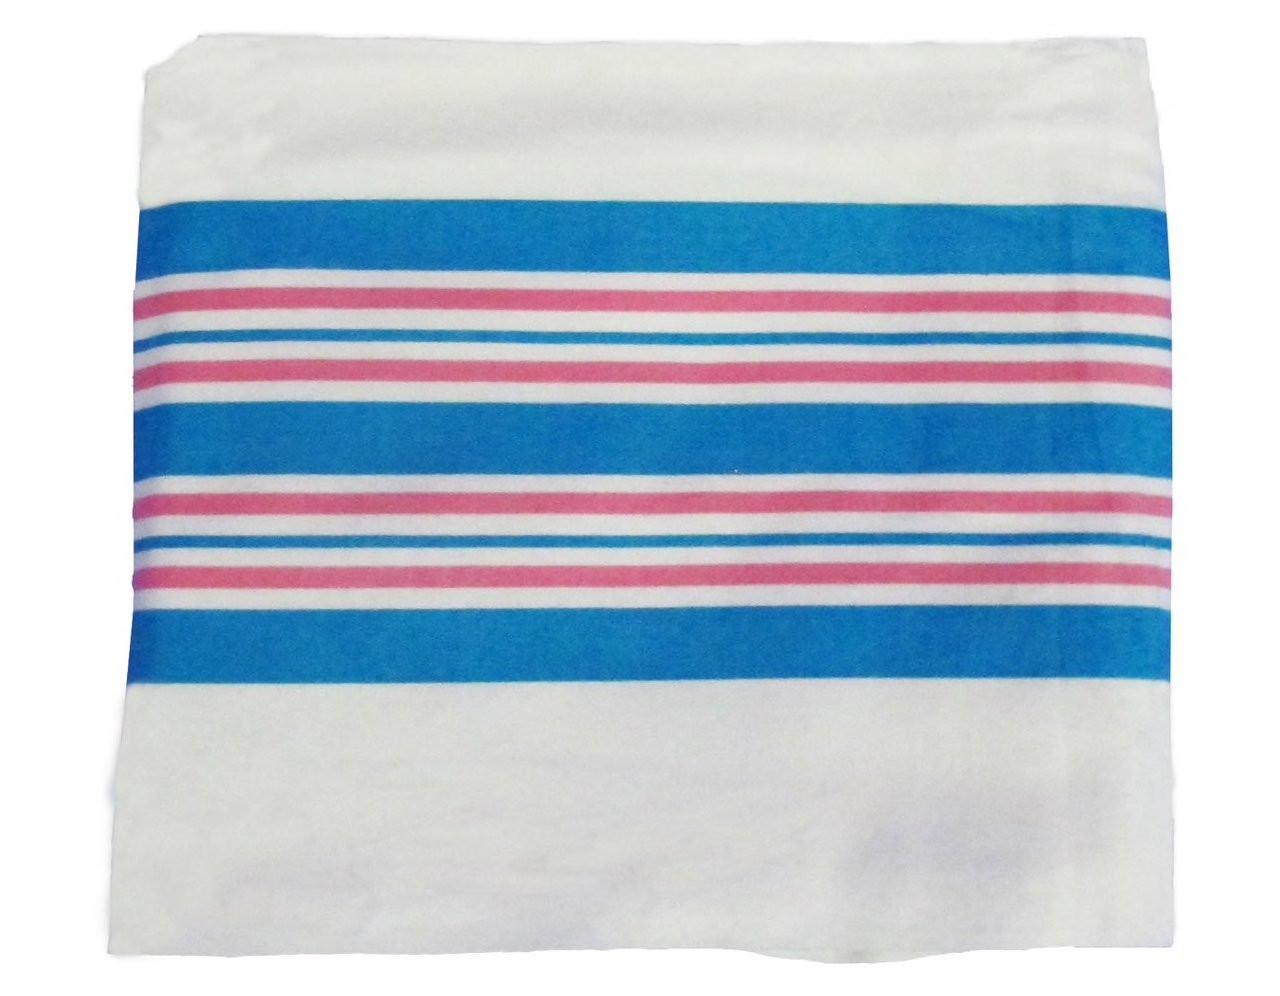 Nursery Receiving Hospital Baby Blankets 100 Pack Live Action Safety